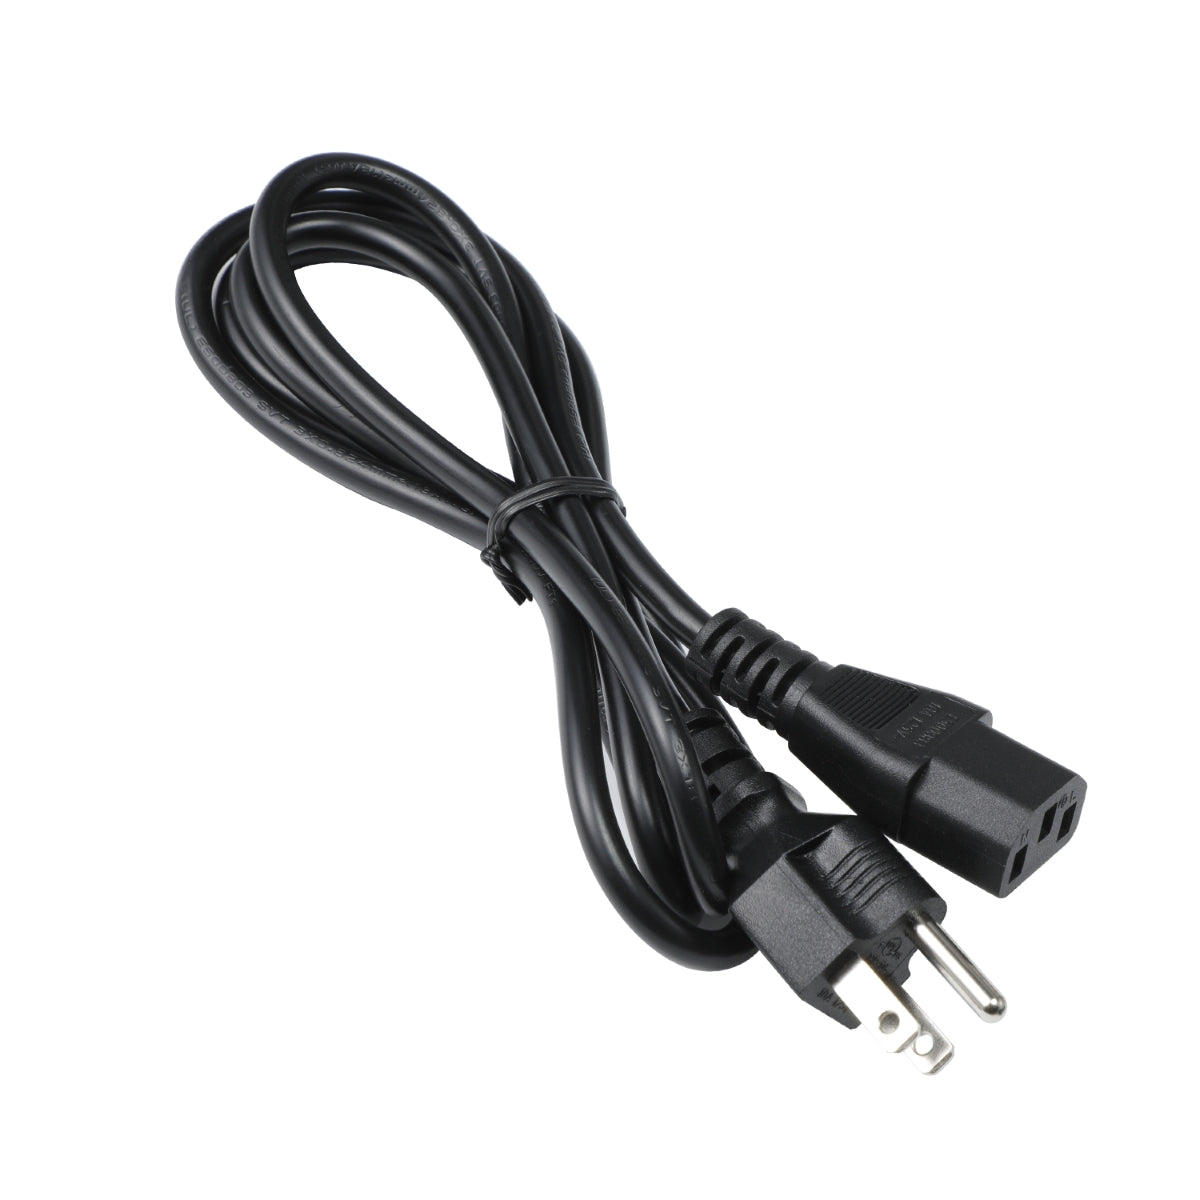 Power Cord for ASUS VG32VQ1B Monitor